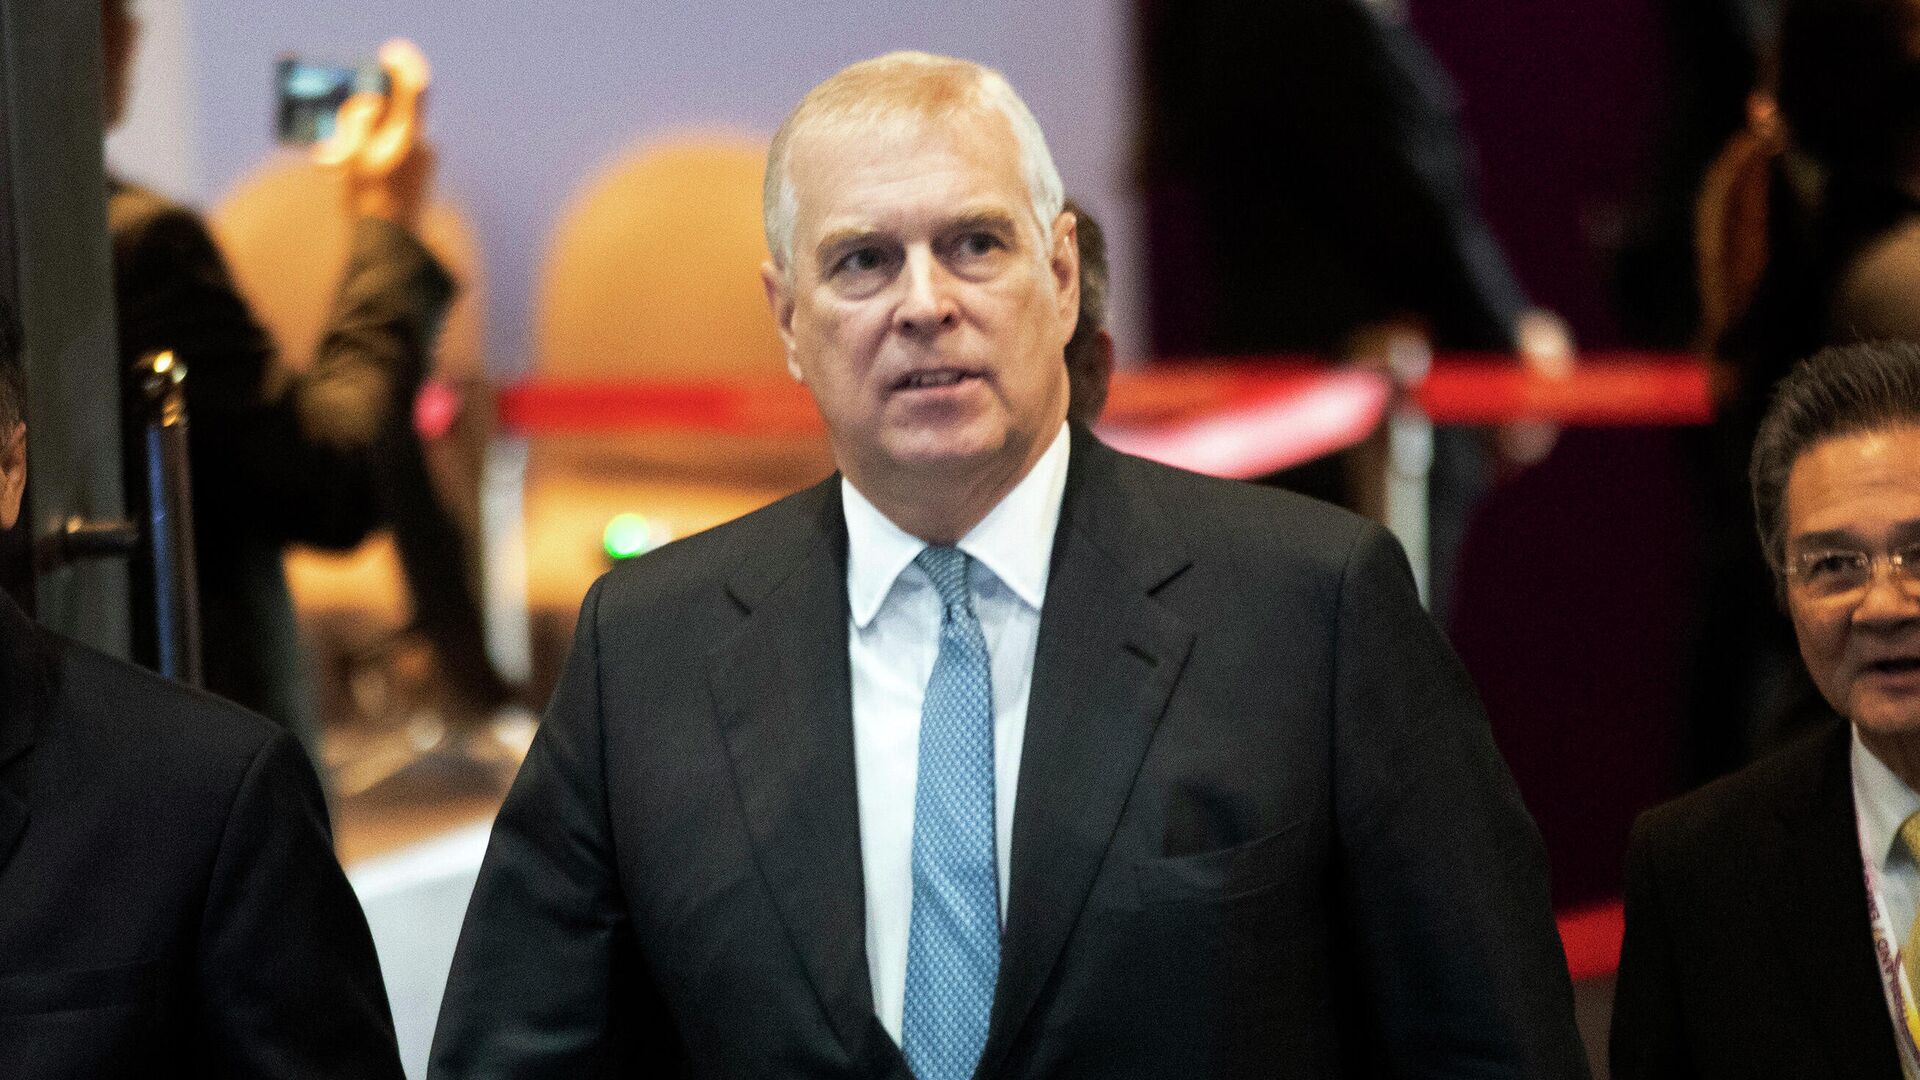 In this Nov. 3, 2019 file photo, Britain's Prince Andrew arrives at ASEAN Business and Investment Summit (ABIS) in Nonthaburi, Thailand. Prince Andrew wasn’t on trial in the Ghislaine Maxwell sex trafficking case, but her conviction is bad news for the man who is ninth in line to the British throne. (AP Photo/Sakchai Lalit, file) - Sputnik International, 1920, 17.02.2022